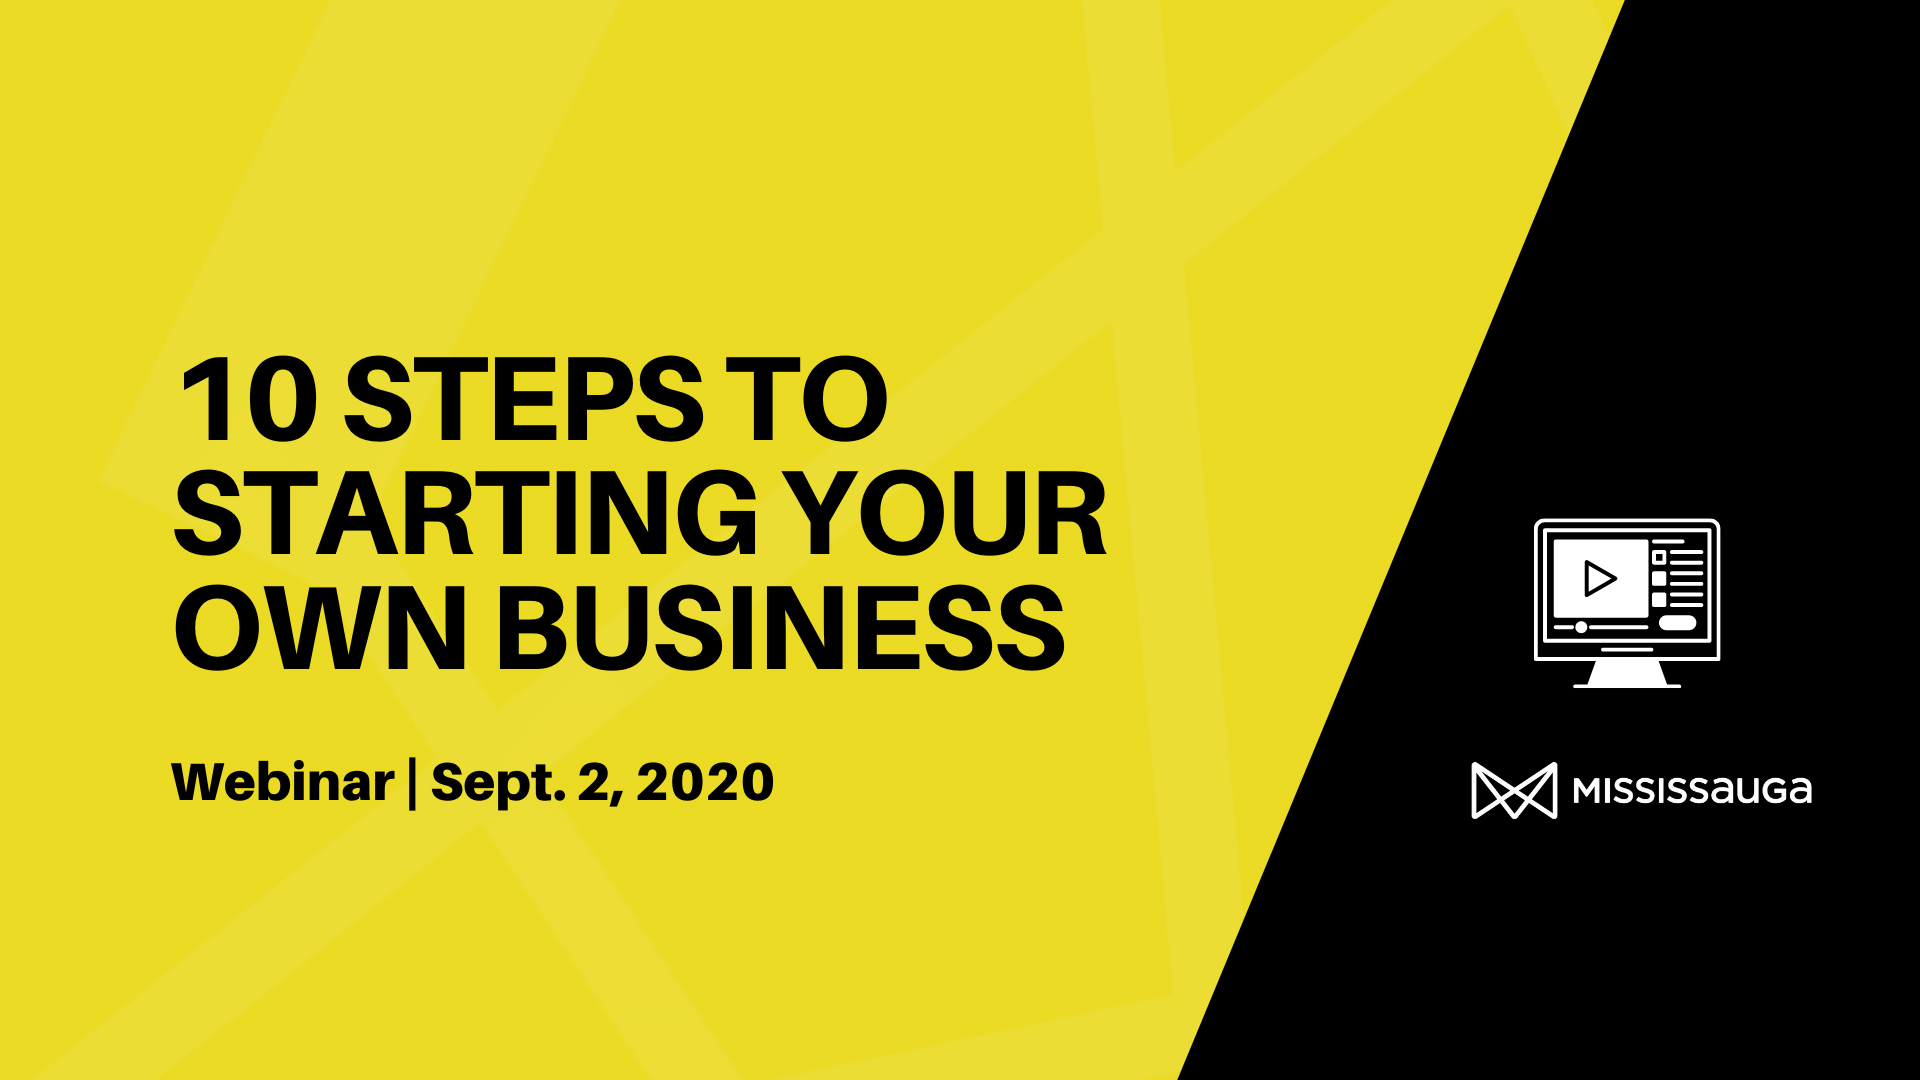 10 Steps to Starting your Own Business – Webinar, Sept 2